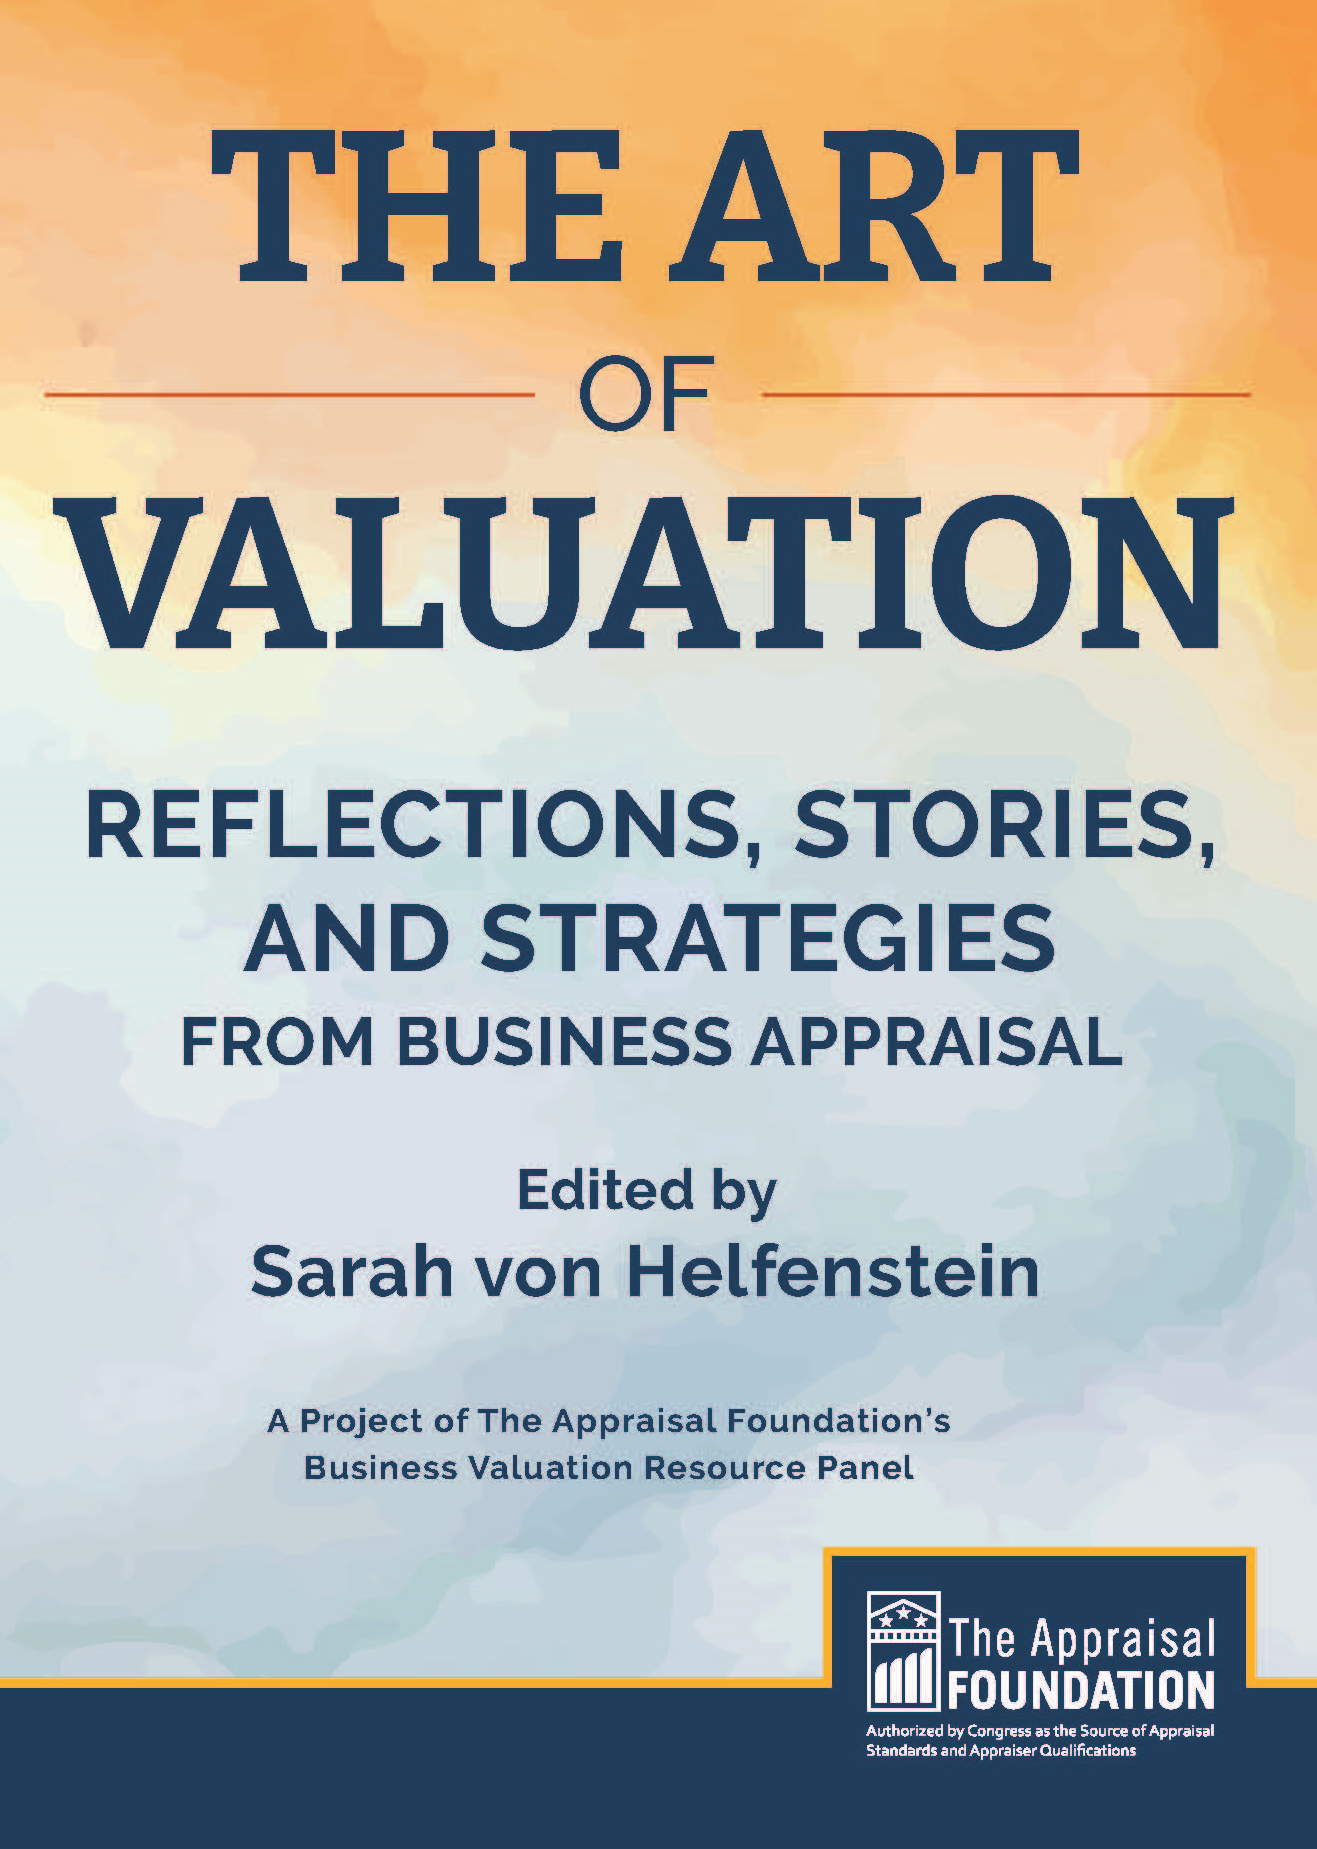 The Art of Valuation